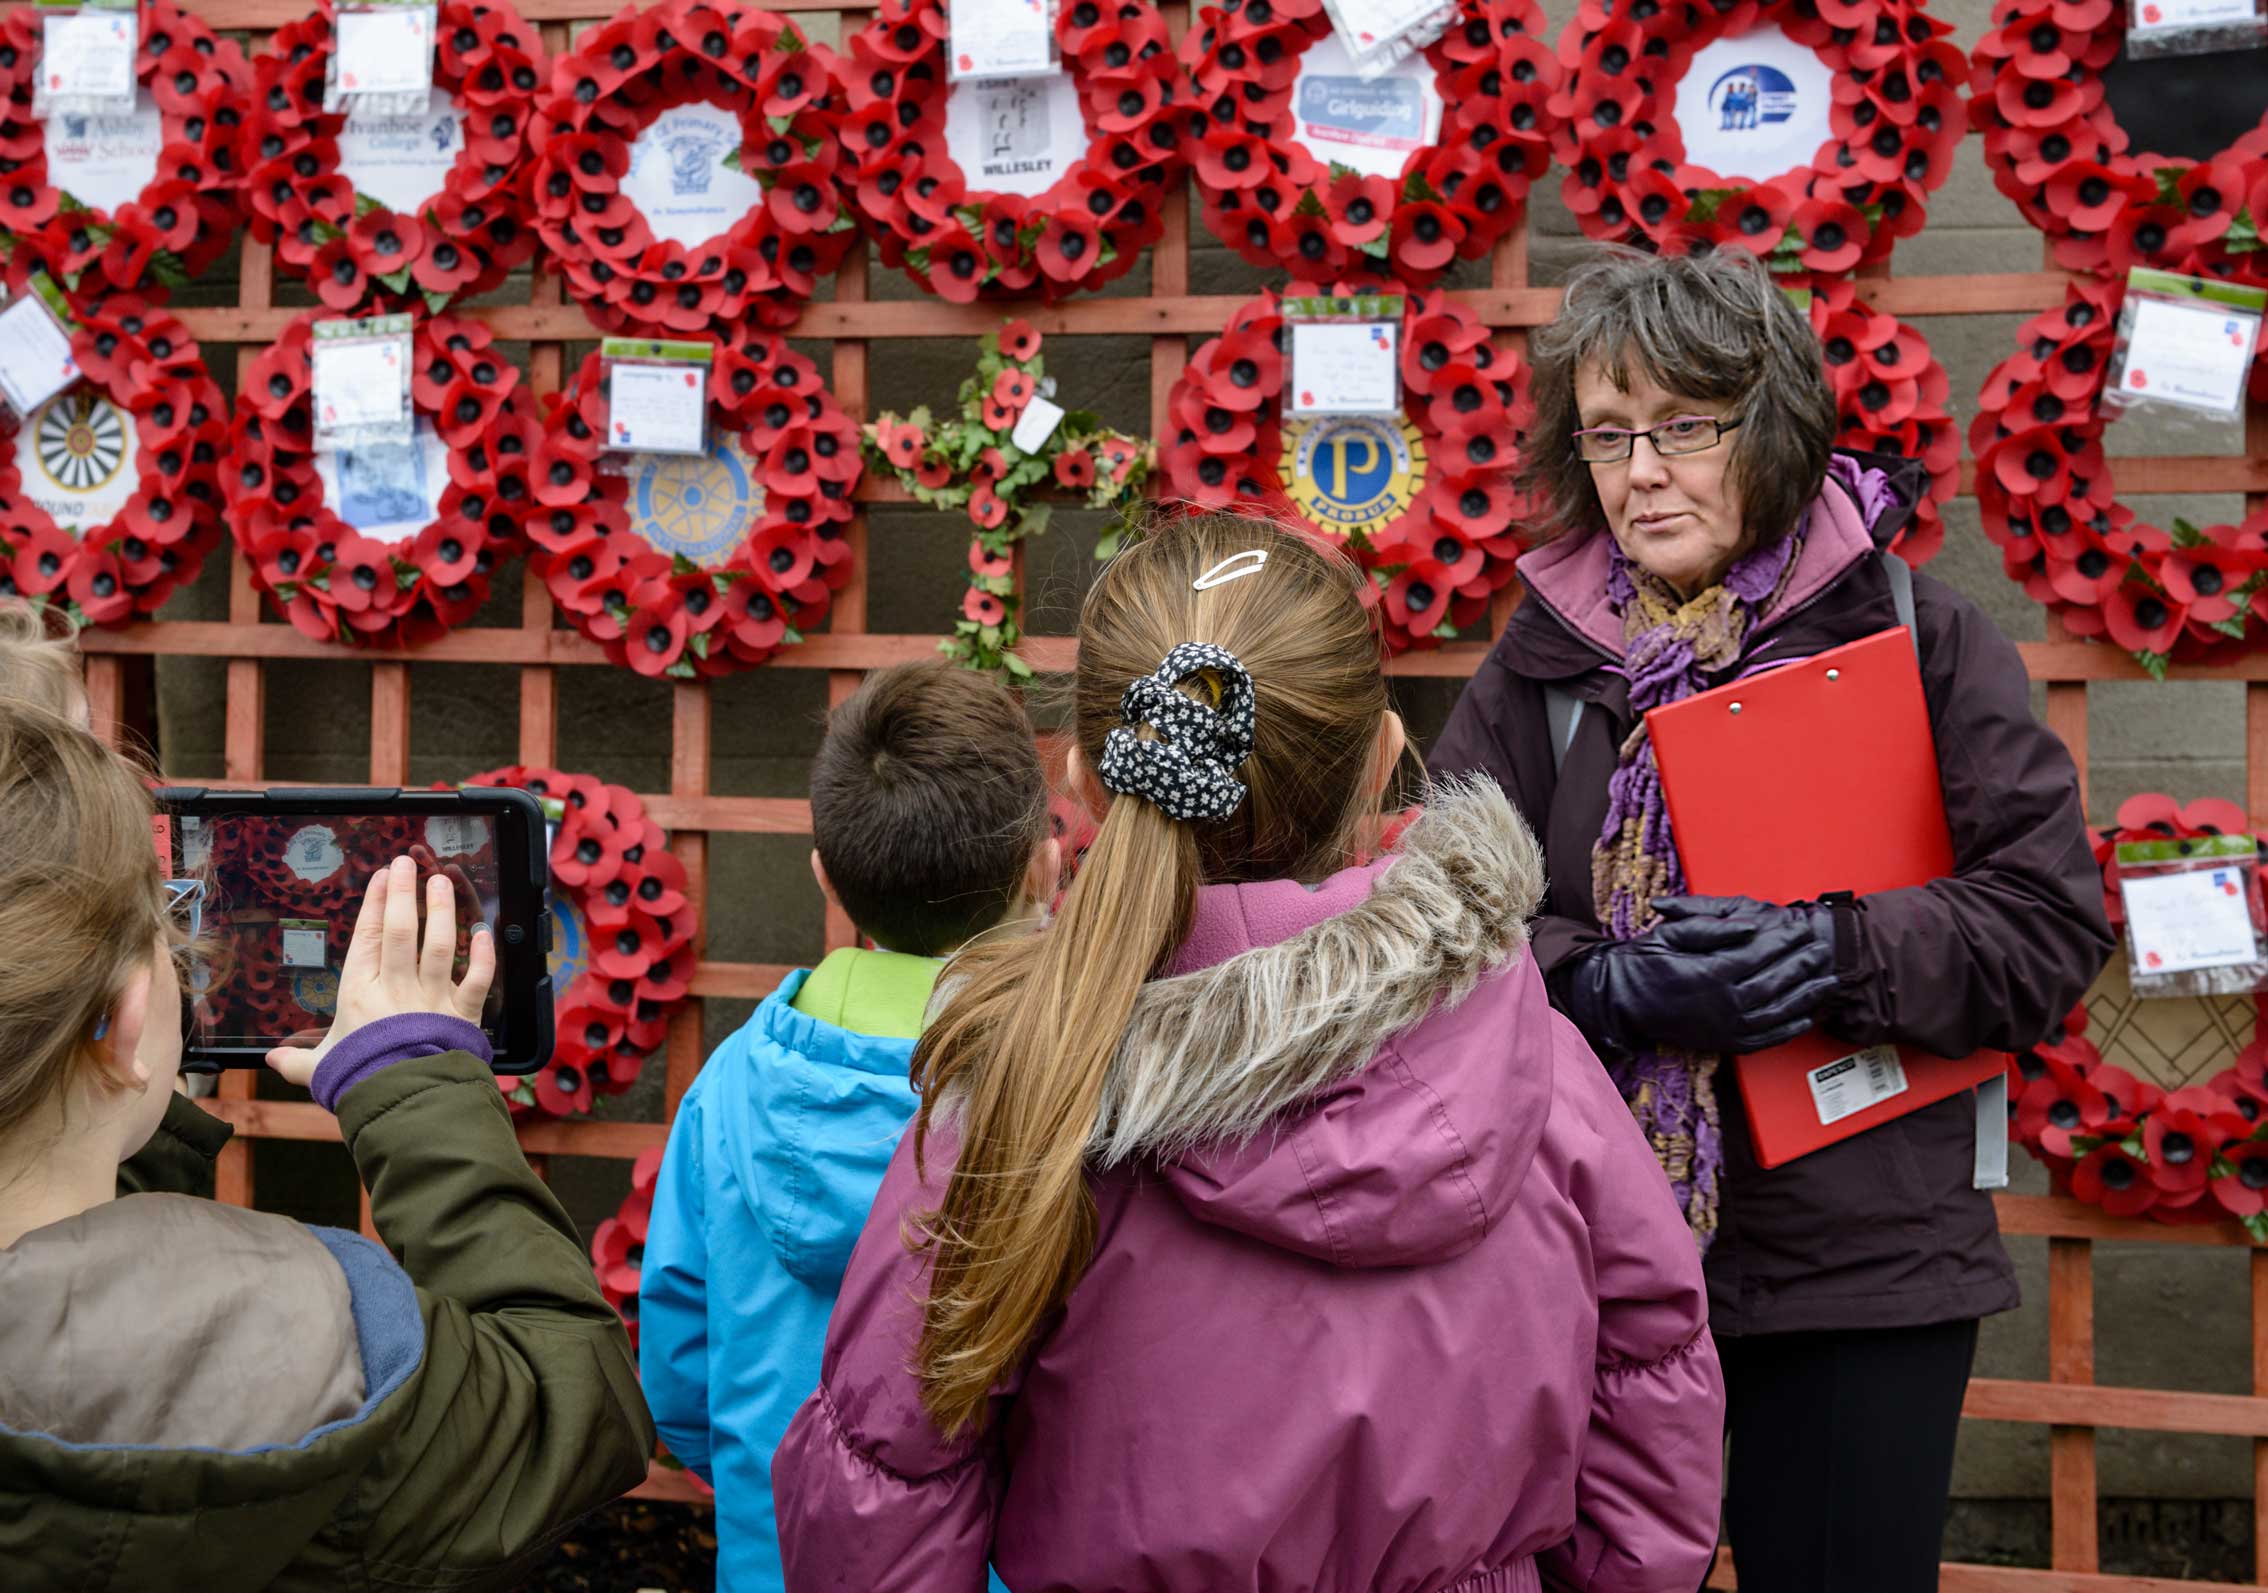 A group of children learning carring out a condition survey on a war memorial.